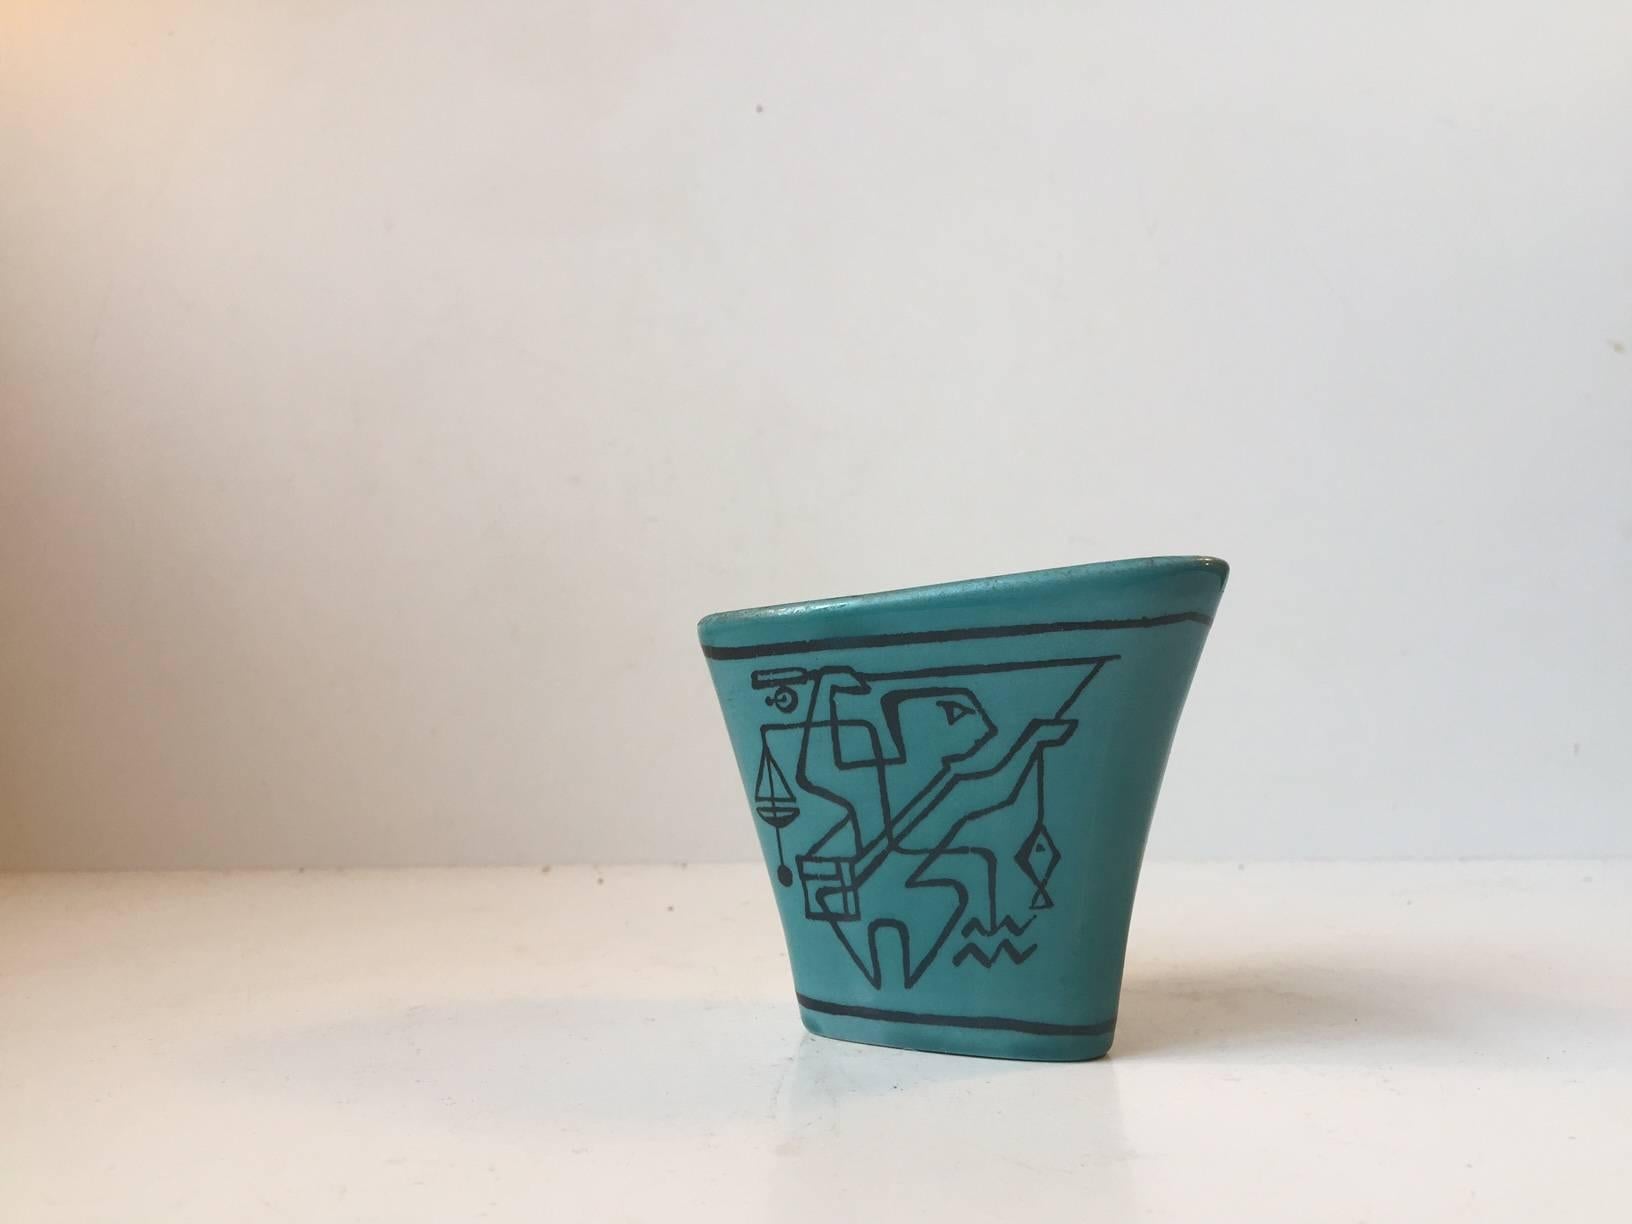 This Turquoise Unika vase was designed by Gunnar Nylund. It has two different sides each with handmade Avant-Garde motifs inspired by the Danish Cobra Movement and Picasso. The vase features Nylund's signature and the manufacturer's mark.